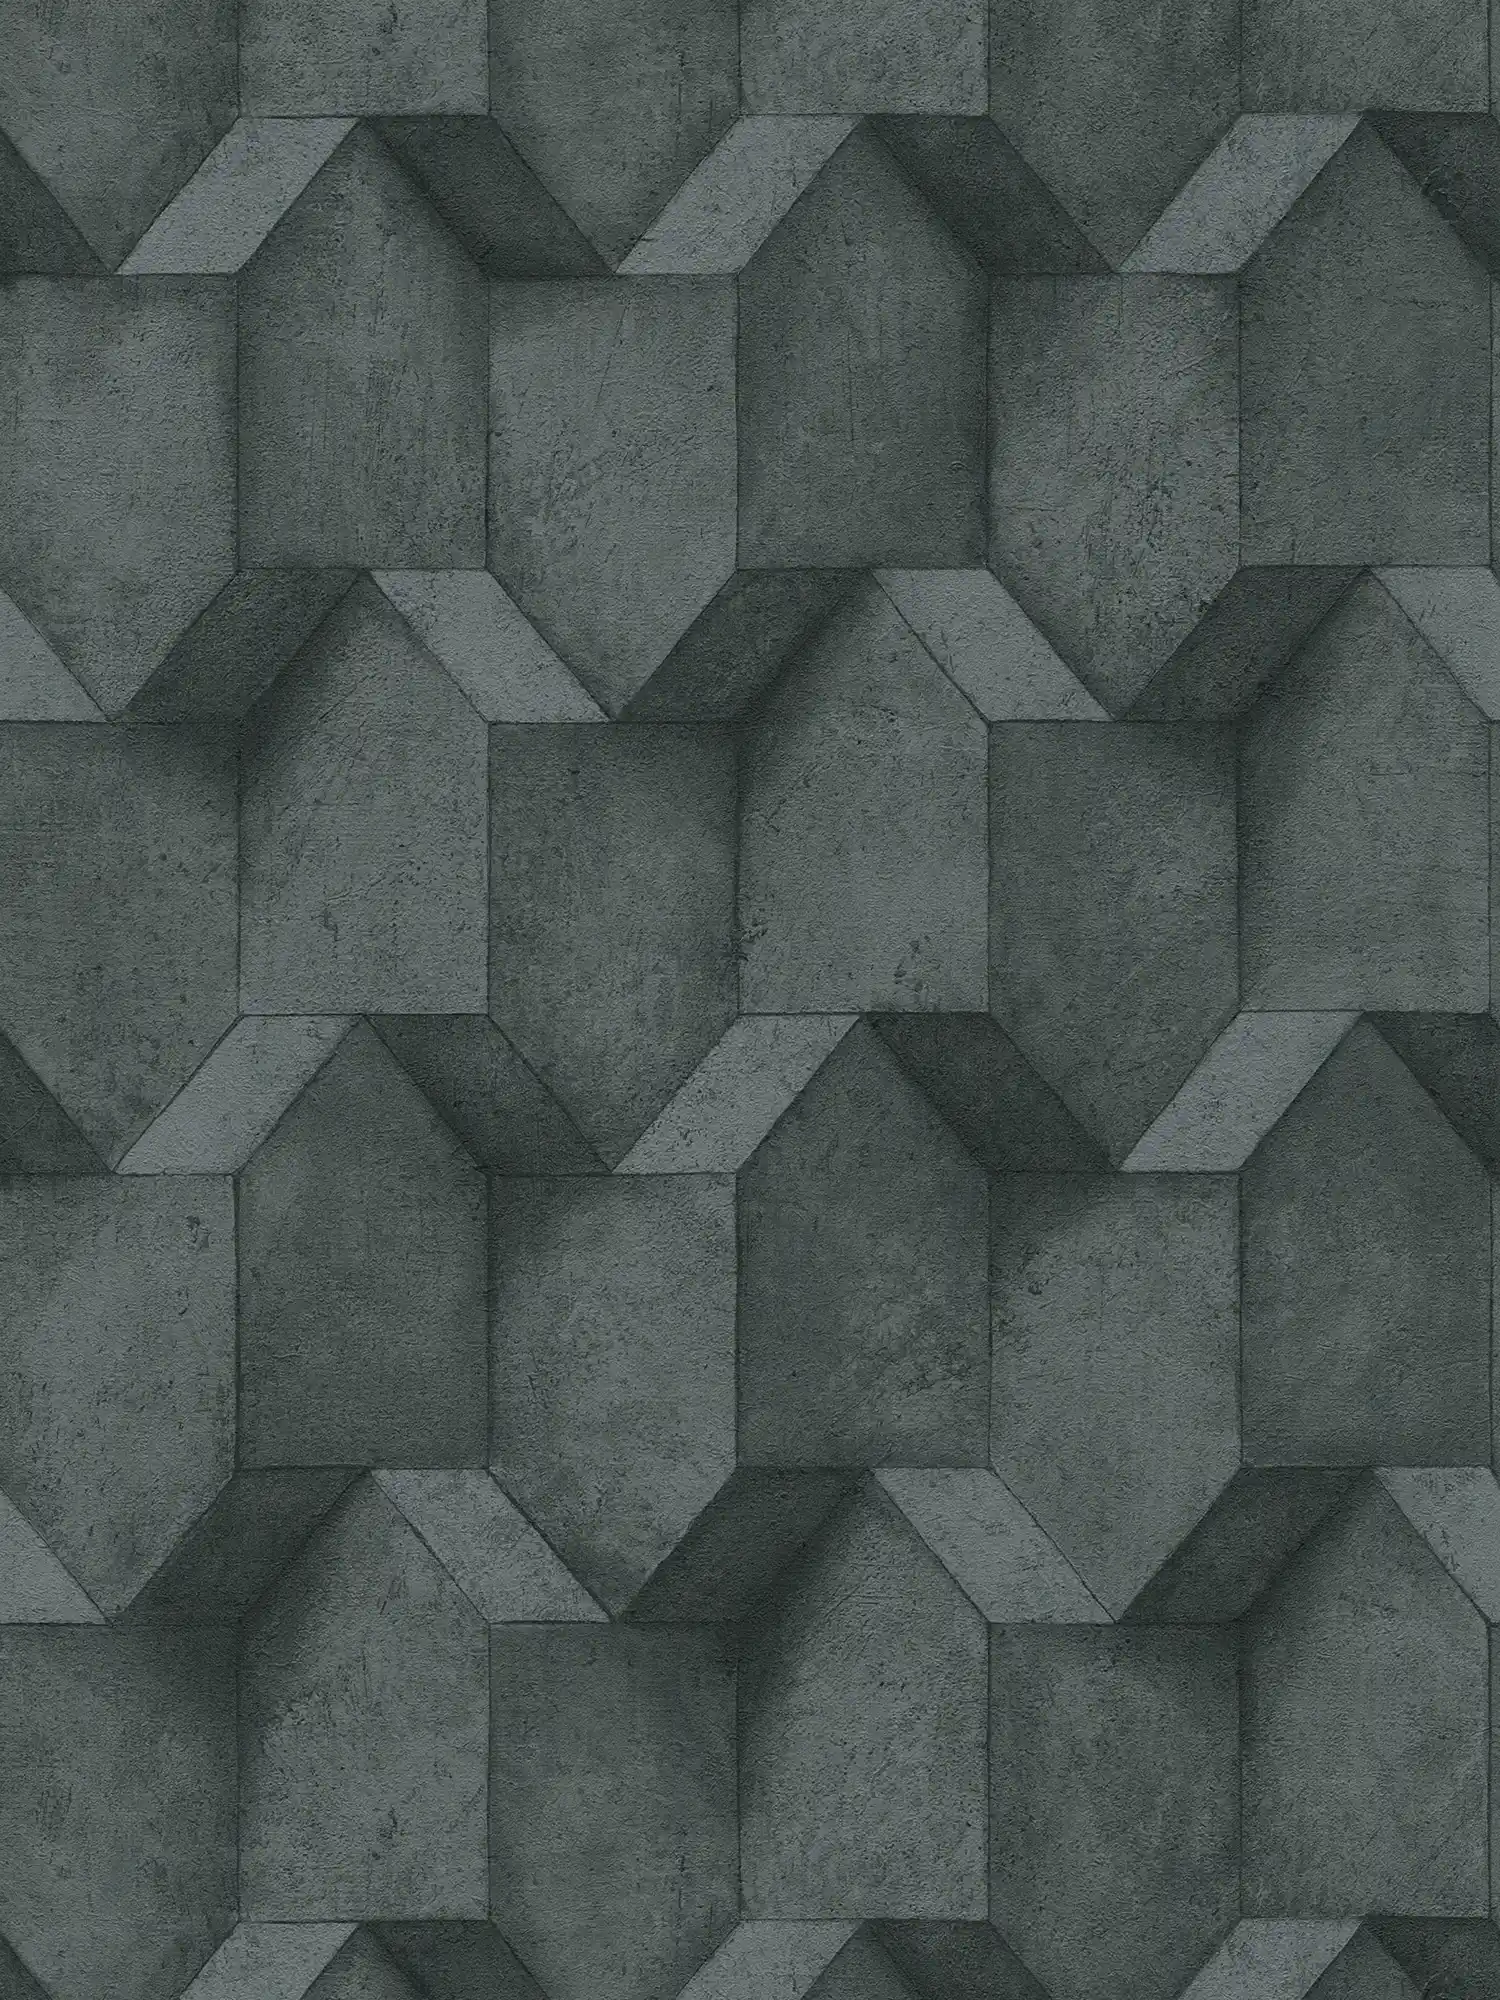 Anthracite wallpaper with 3D concrete look - black, grey
